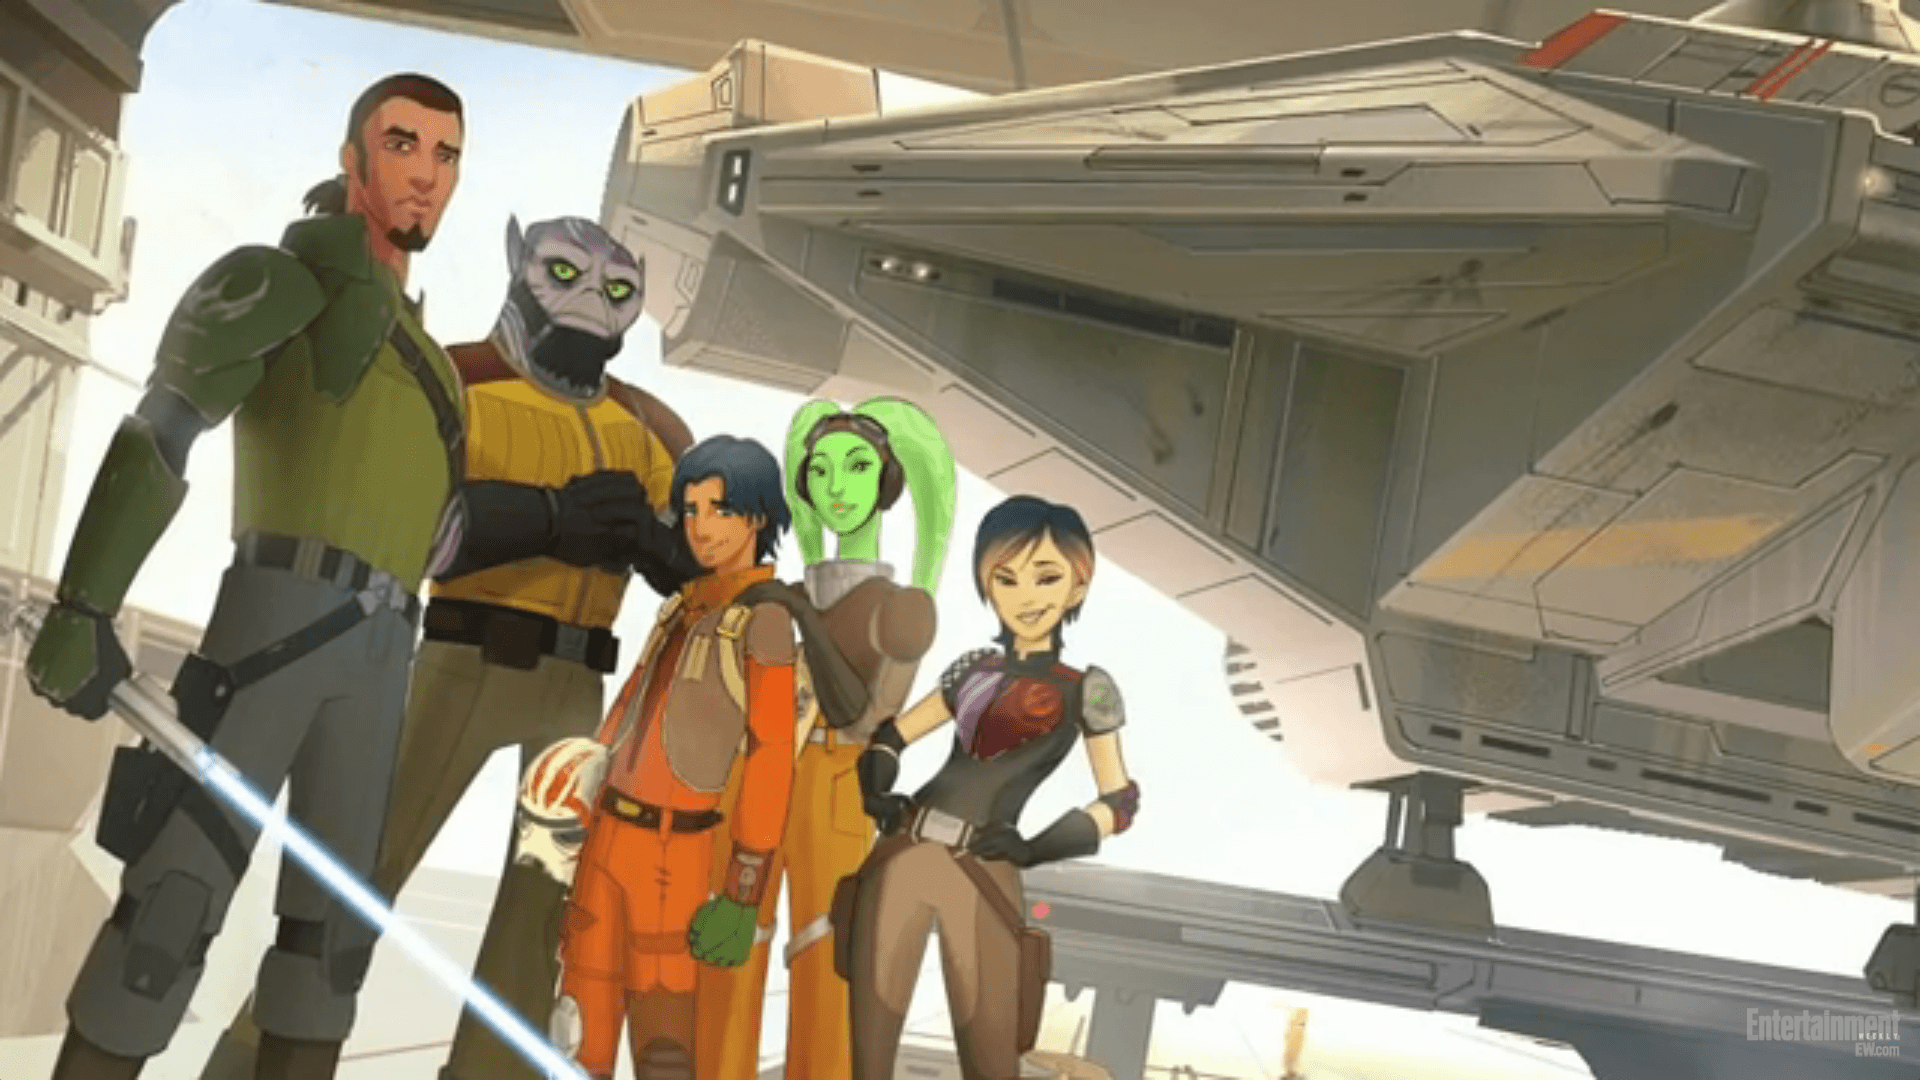 Star Wars: Rebels Episode Report. by Horatio. Ace of Geeks